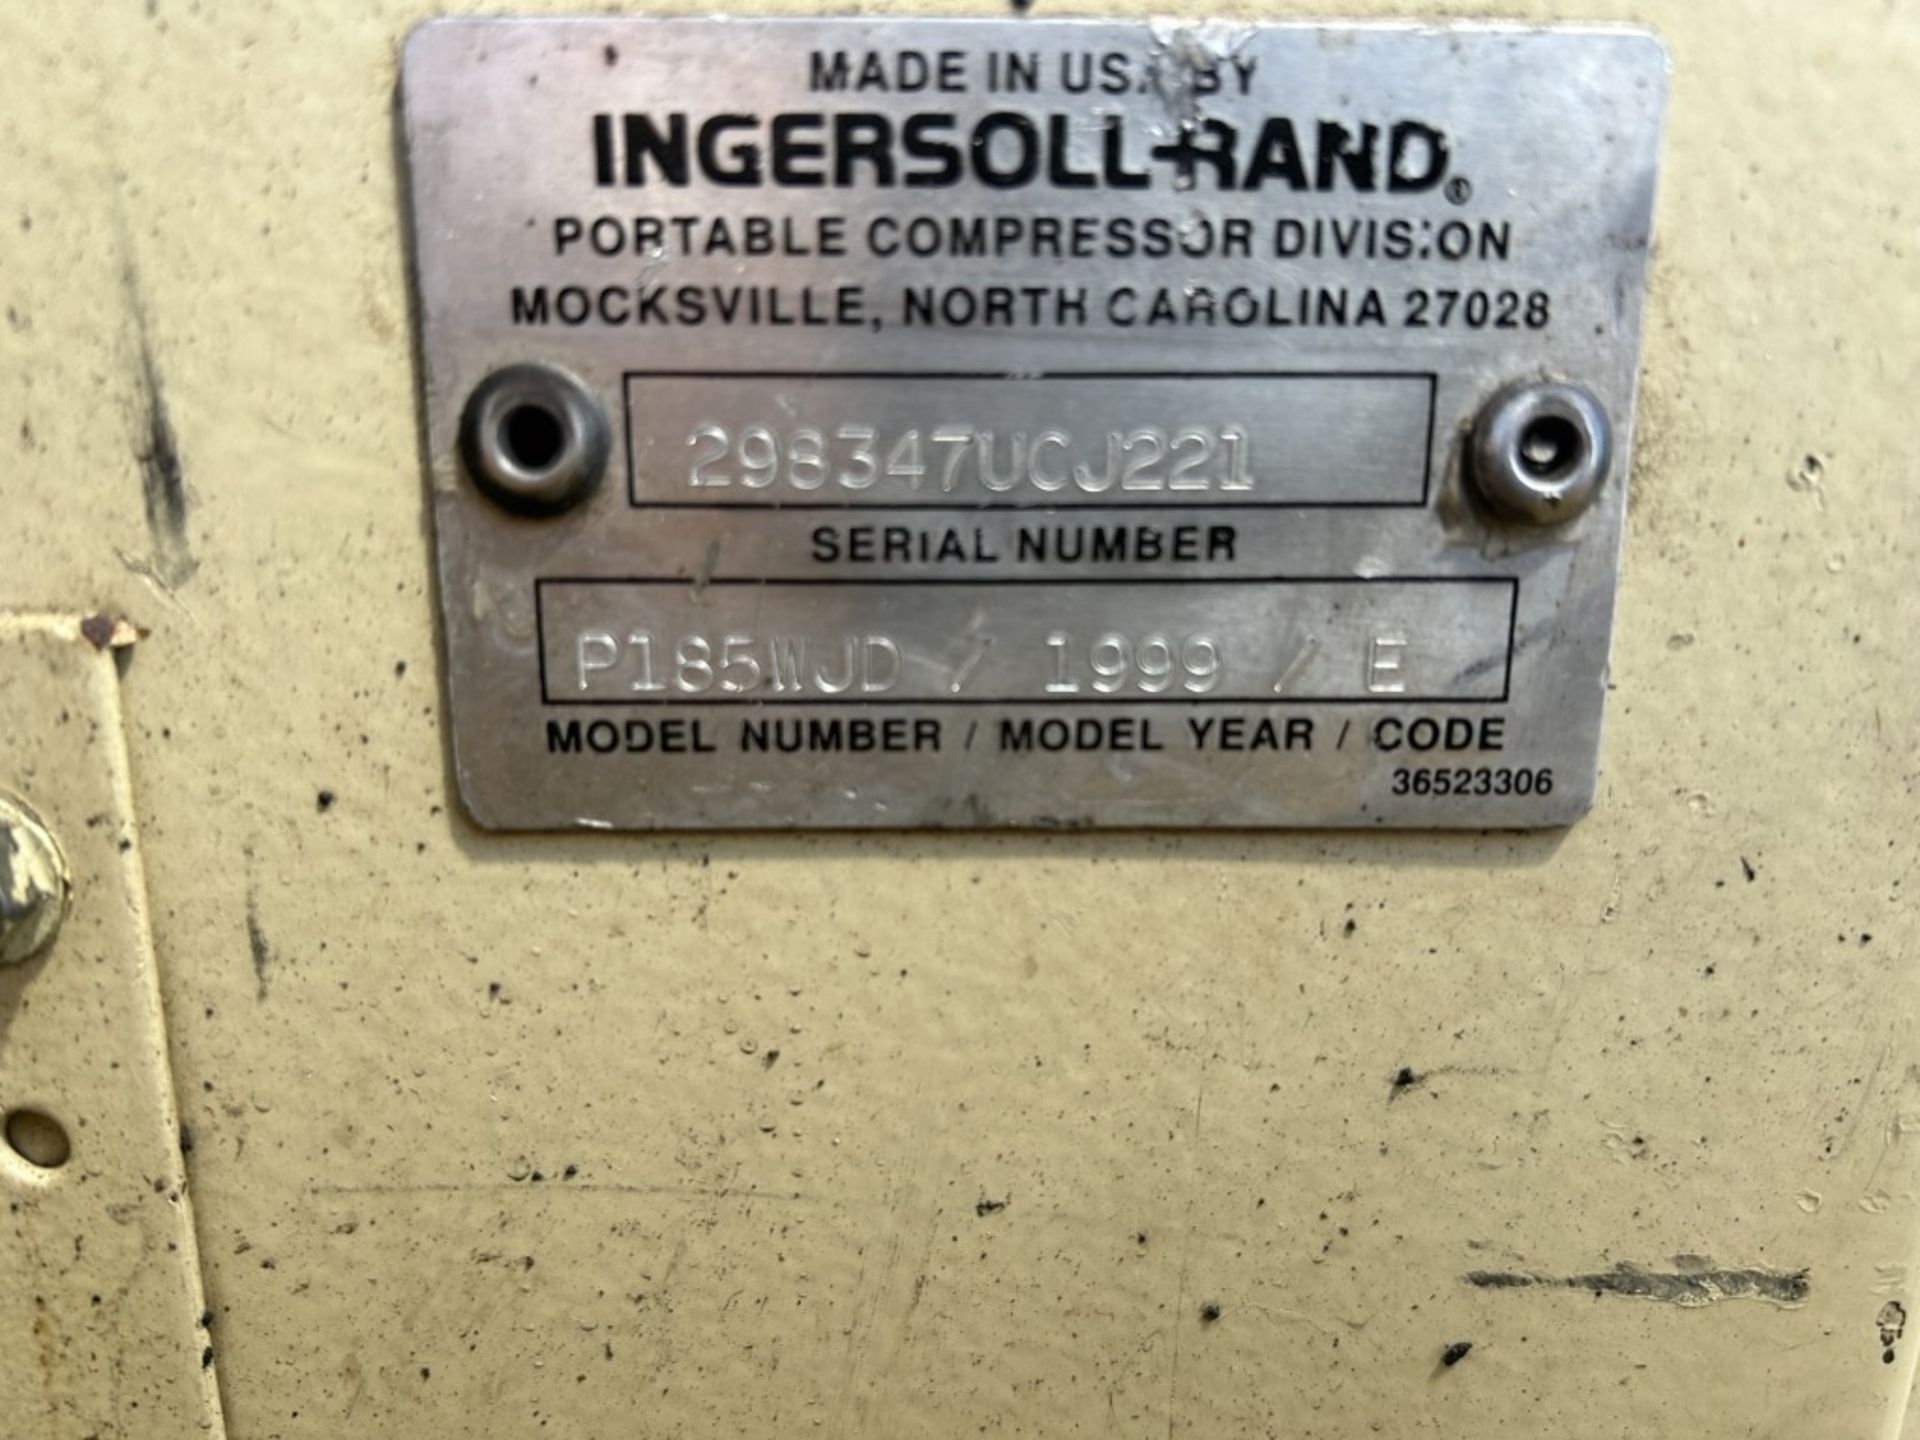 1999 Ingersoll-Rand 185 Towable Air Compressor - Image 29 of 29